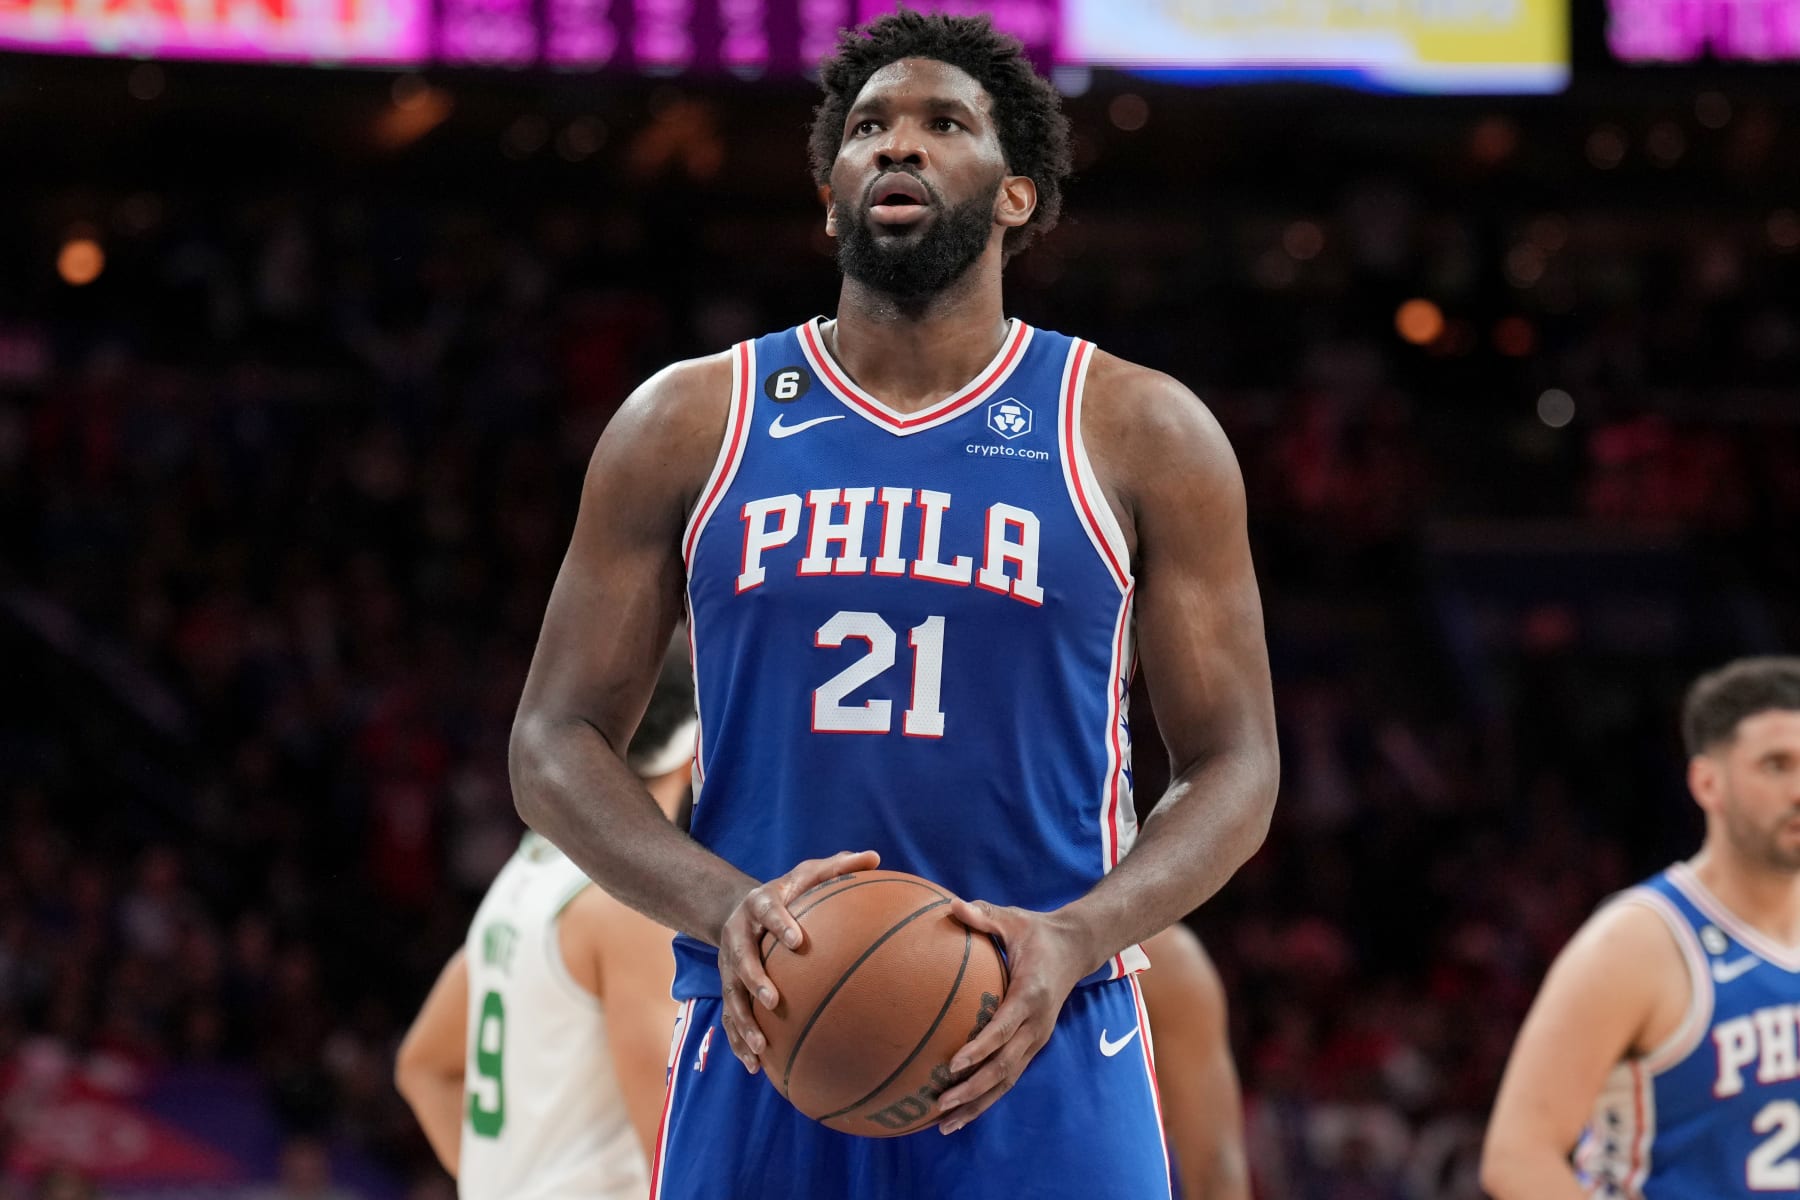  Knicks Condemn Joel Embiid's Controversial Play Amid Playoff Tensions